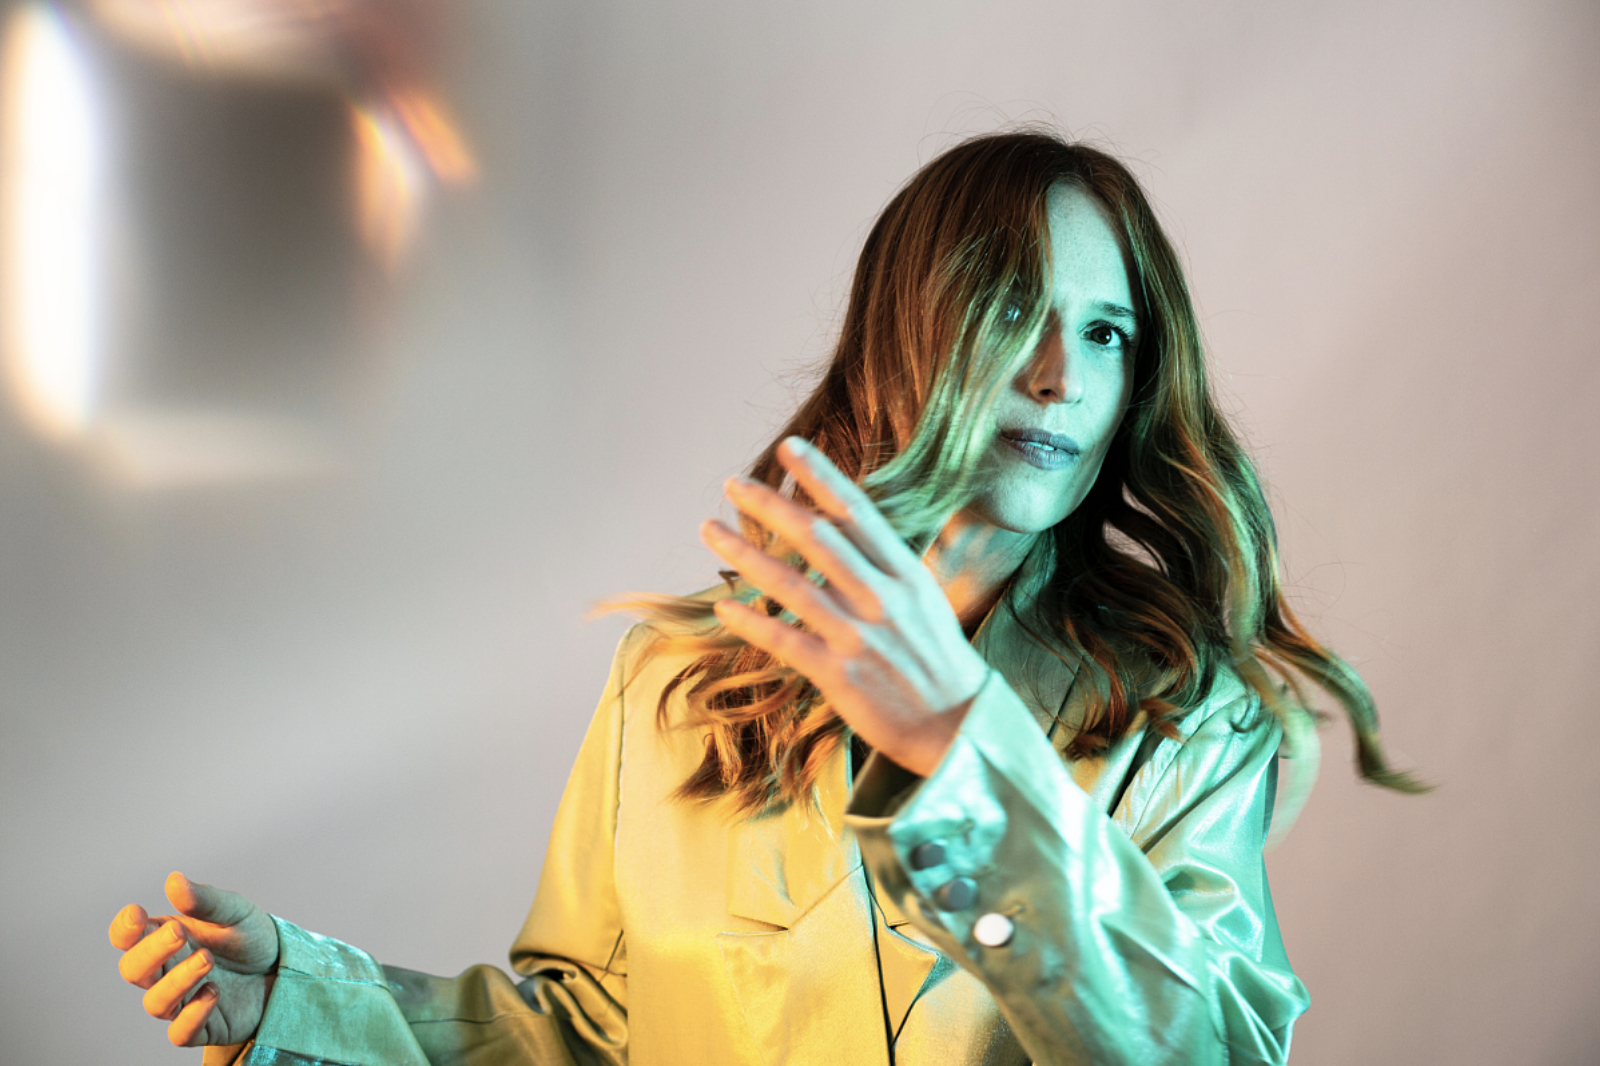 Metronomy's Anna Prior releases debut solo single